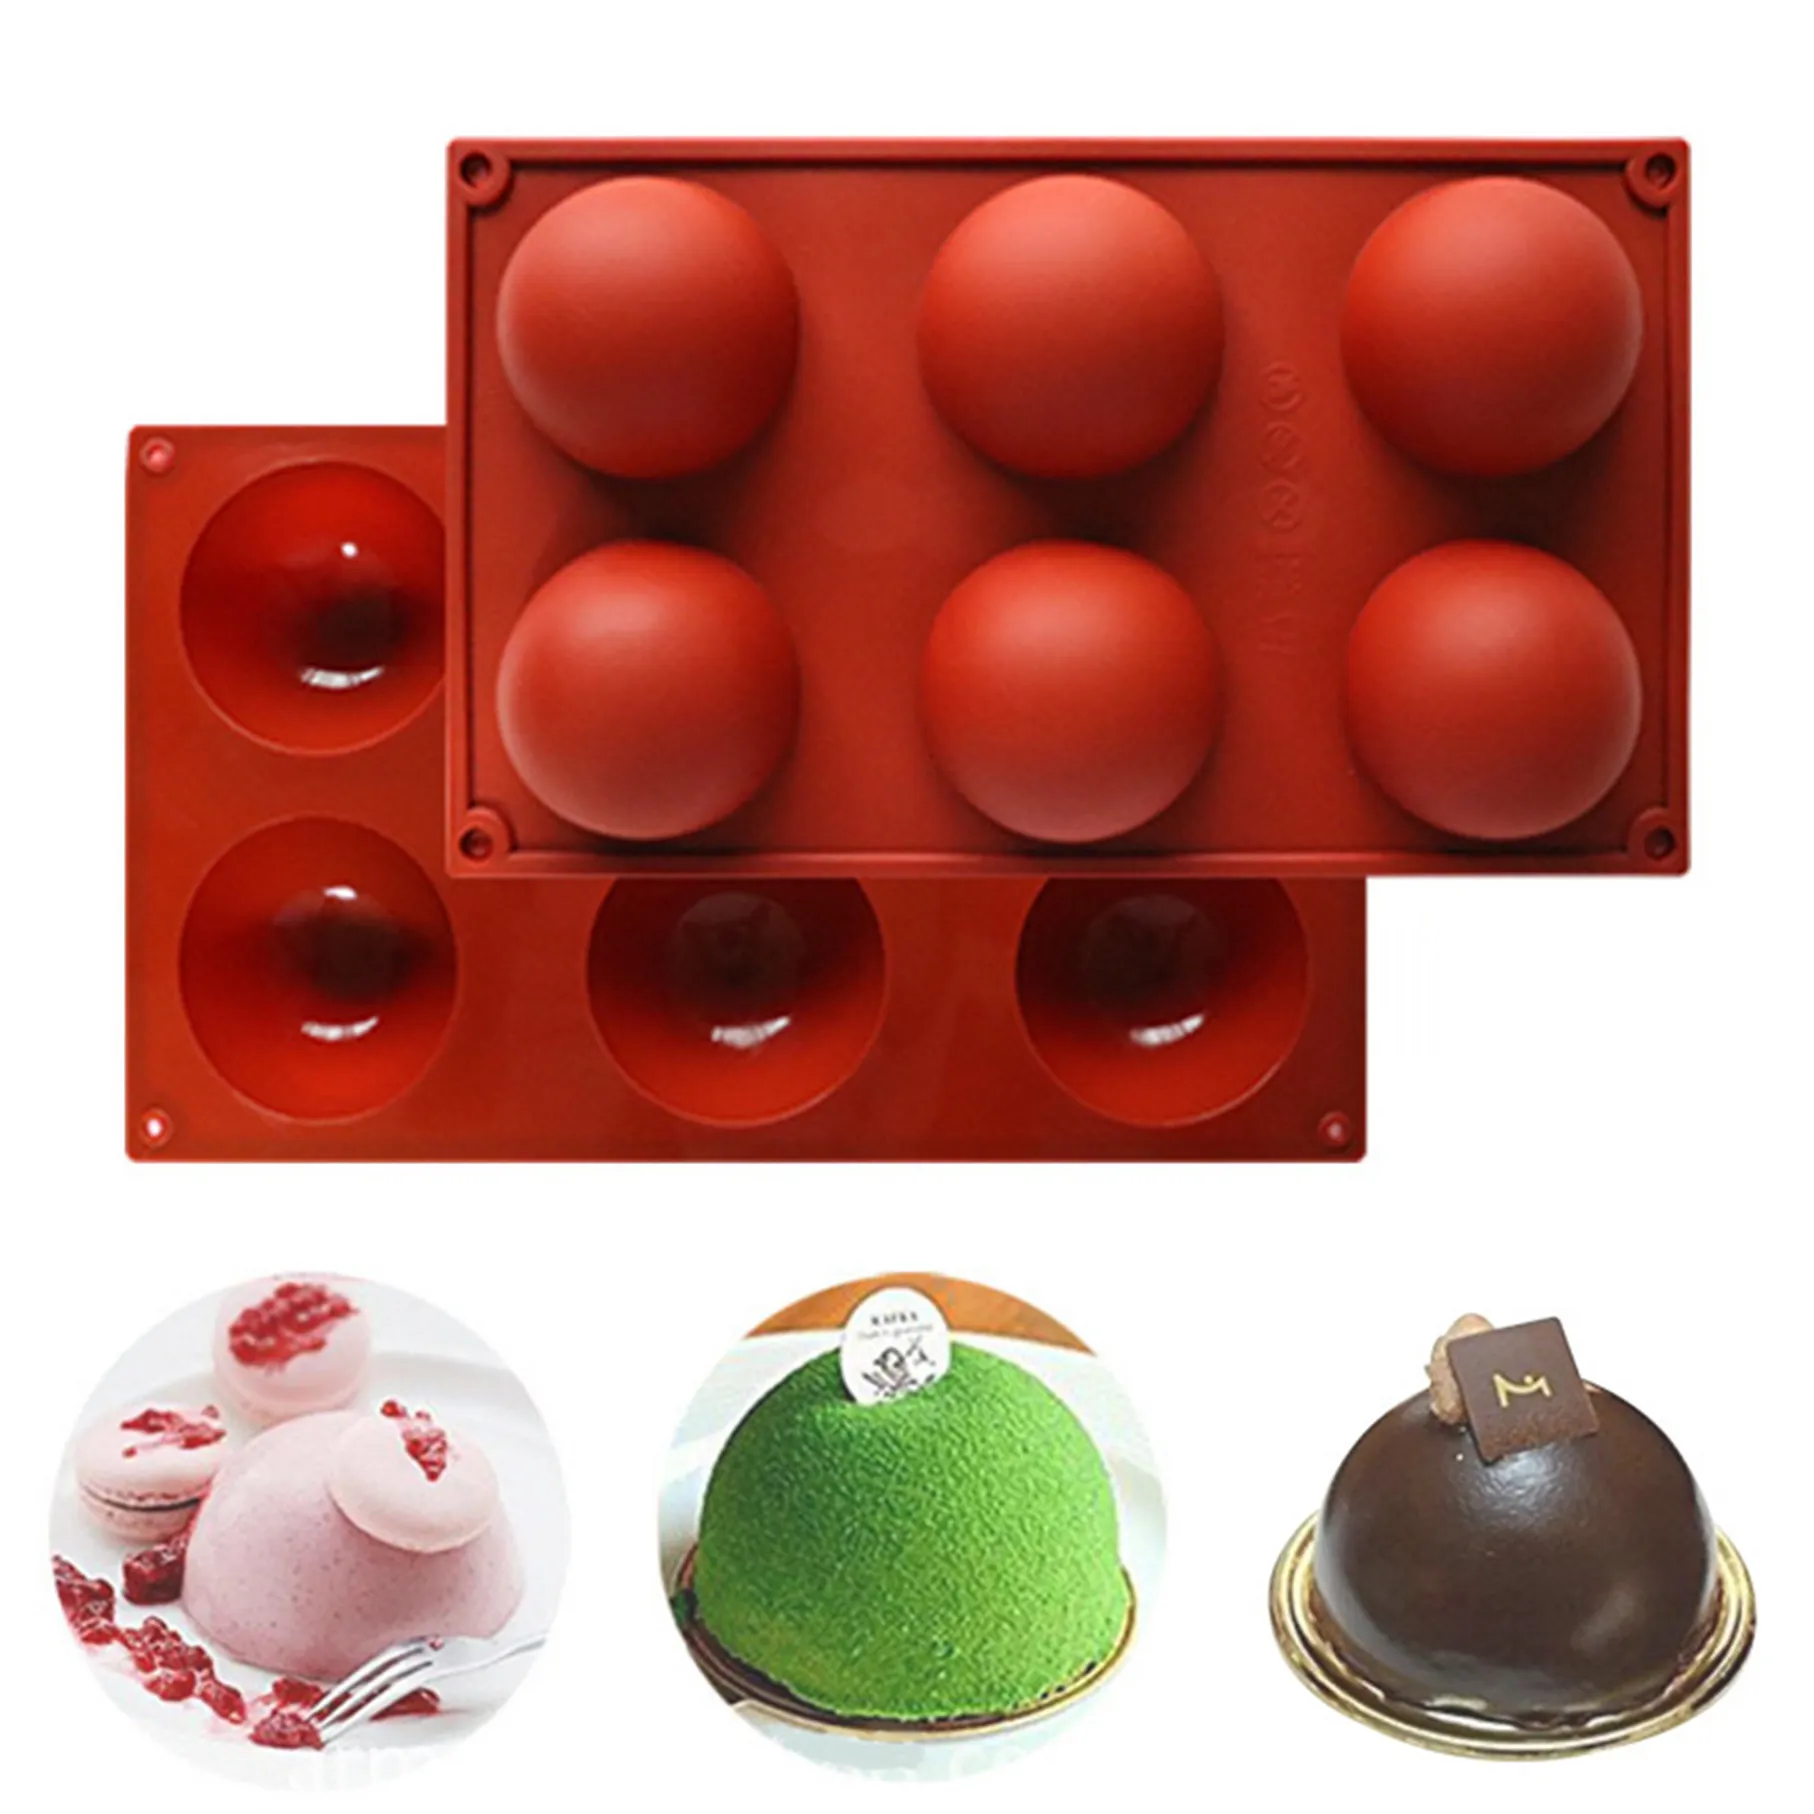 2021 Factory wholesale silicone Mold for Baking Cake , Making Desserts & Chocolate.